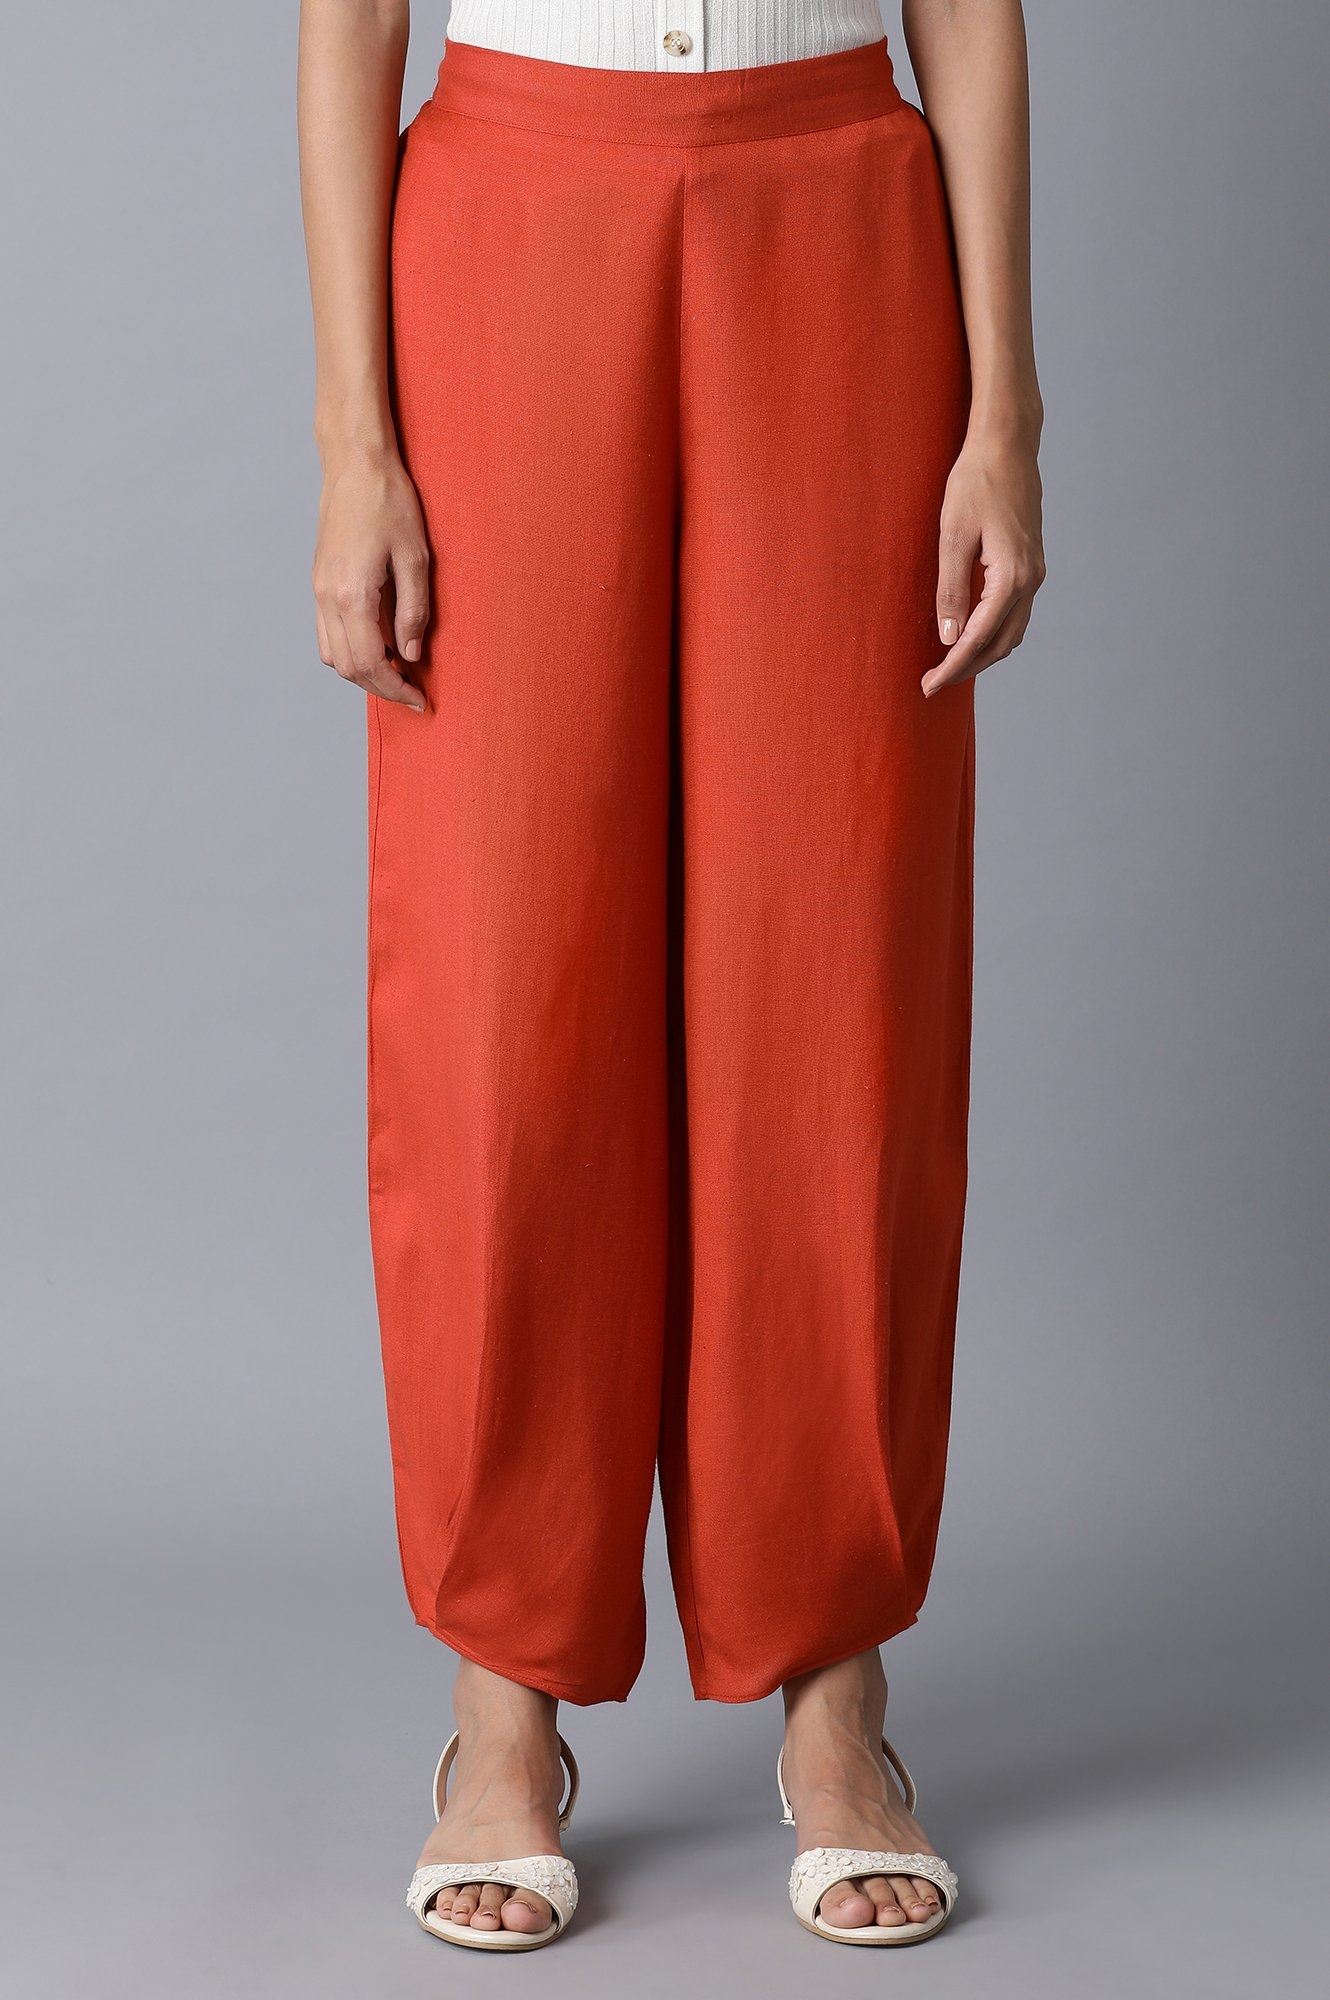 W | W Apricot Orange Solid Pleated Carrot Pants 